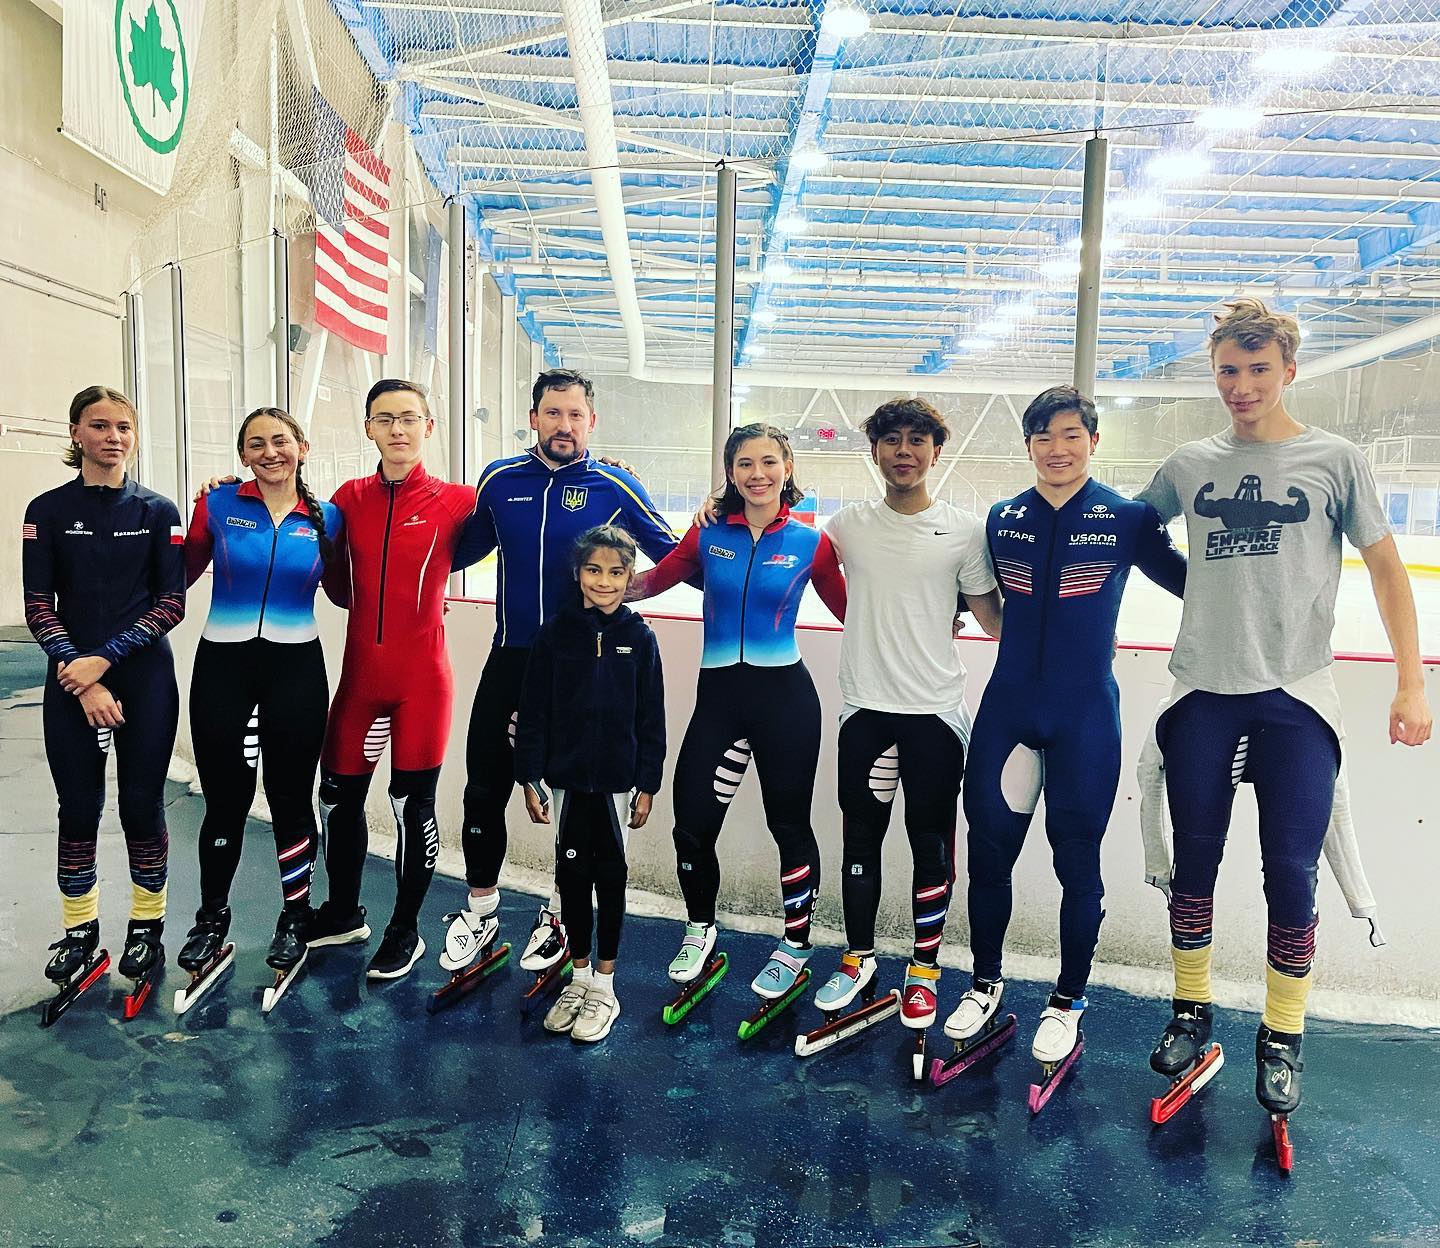 New York skaters wish everyone to be stronger and faster next season 2022-2023 💪🏻